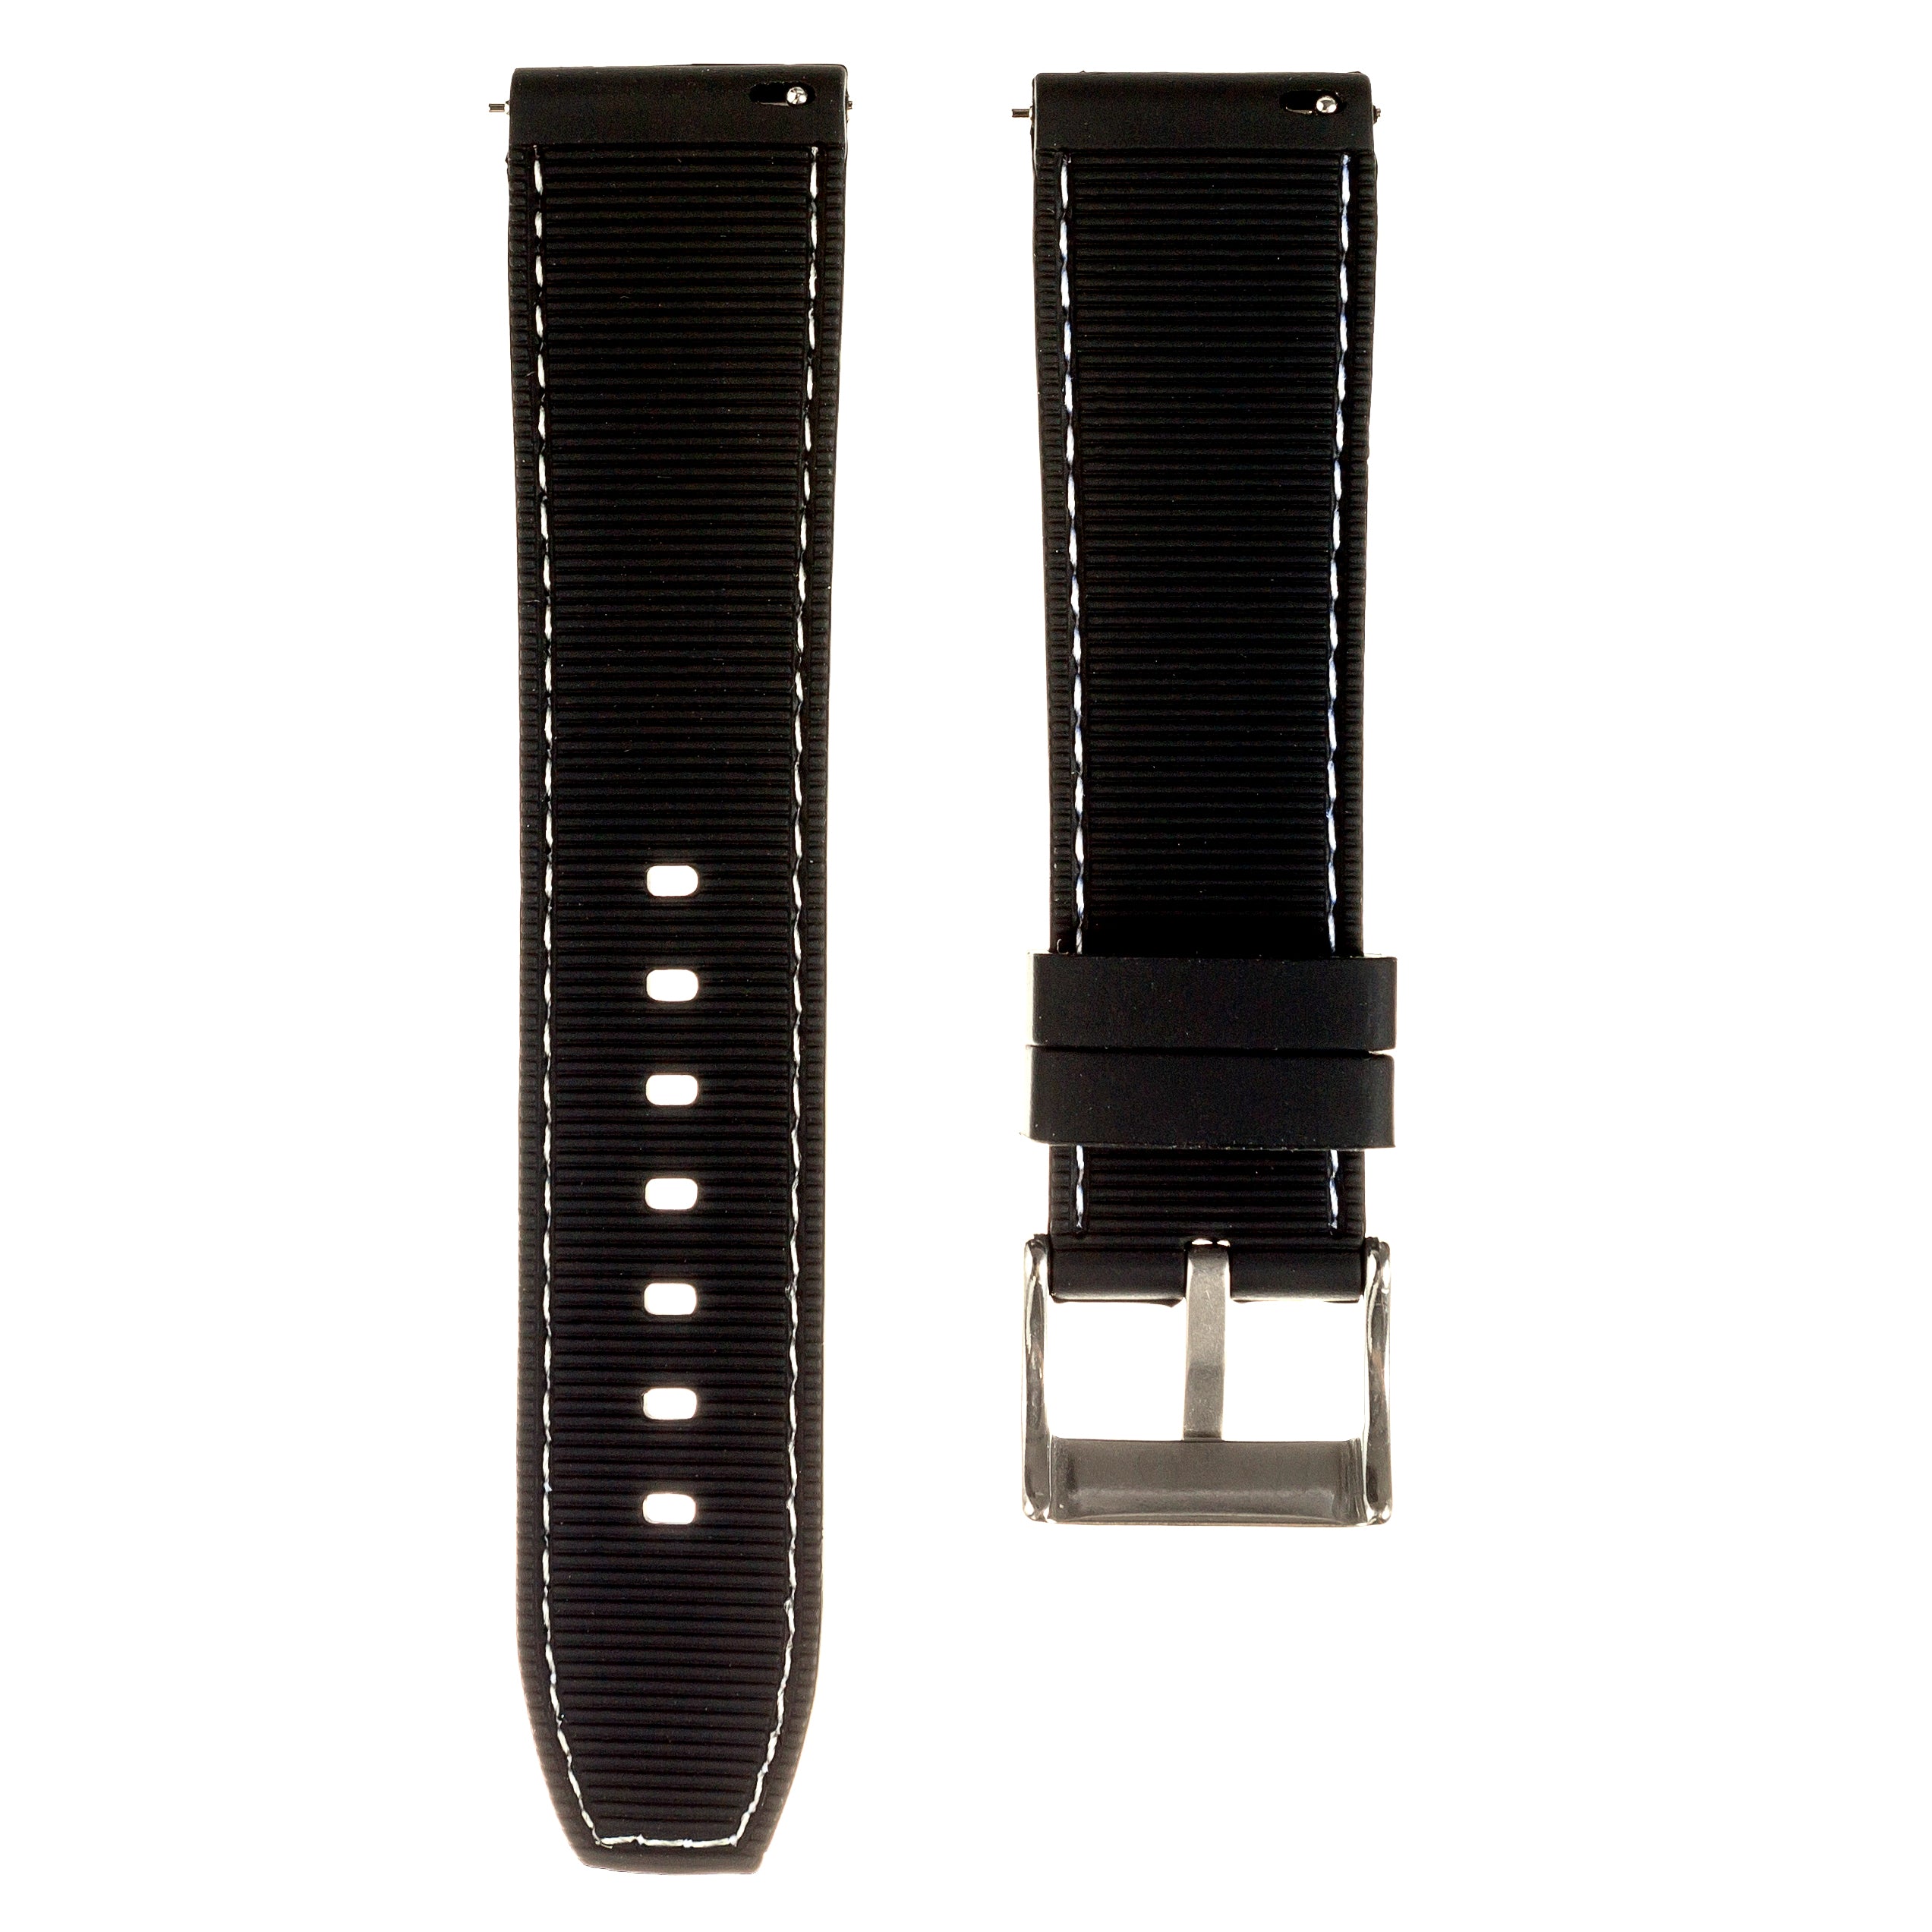 Perforated Stitch Soft Silicone Strap - Quick-Release - Black with White Stitch (2401)